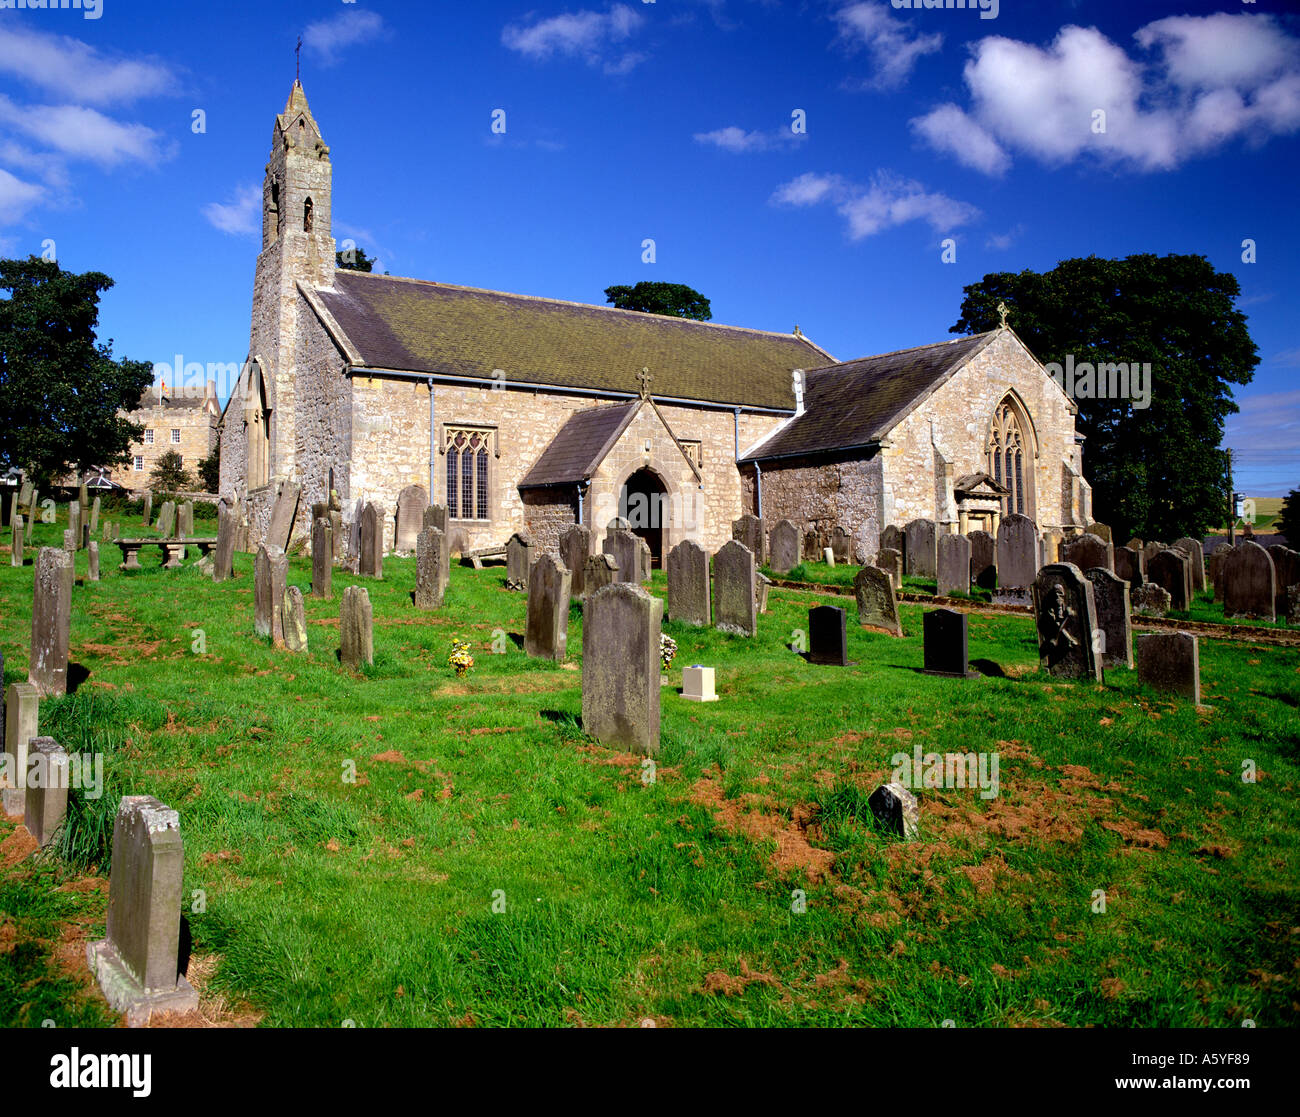 St Cuthbert s Church and Vicar s Pele Tower Elsdon Northumberland England Stock Photo